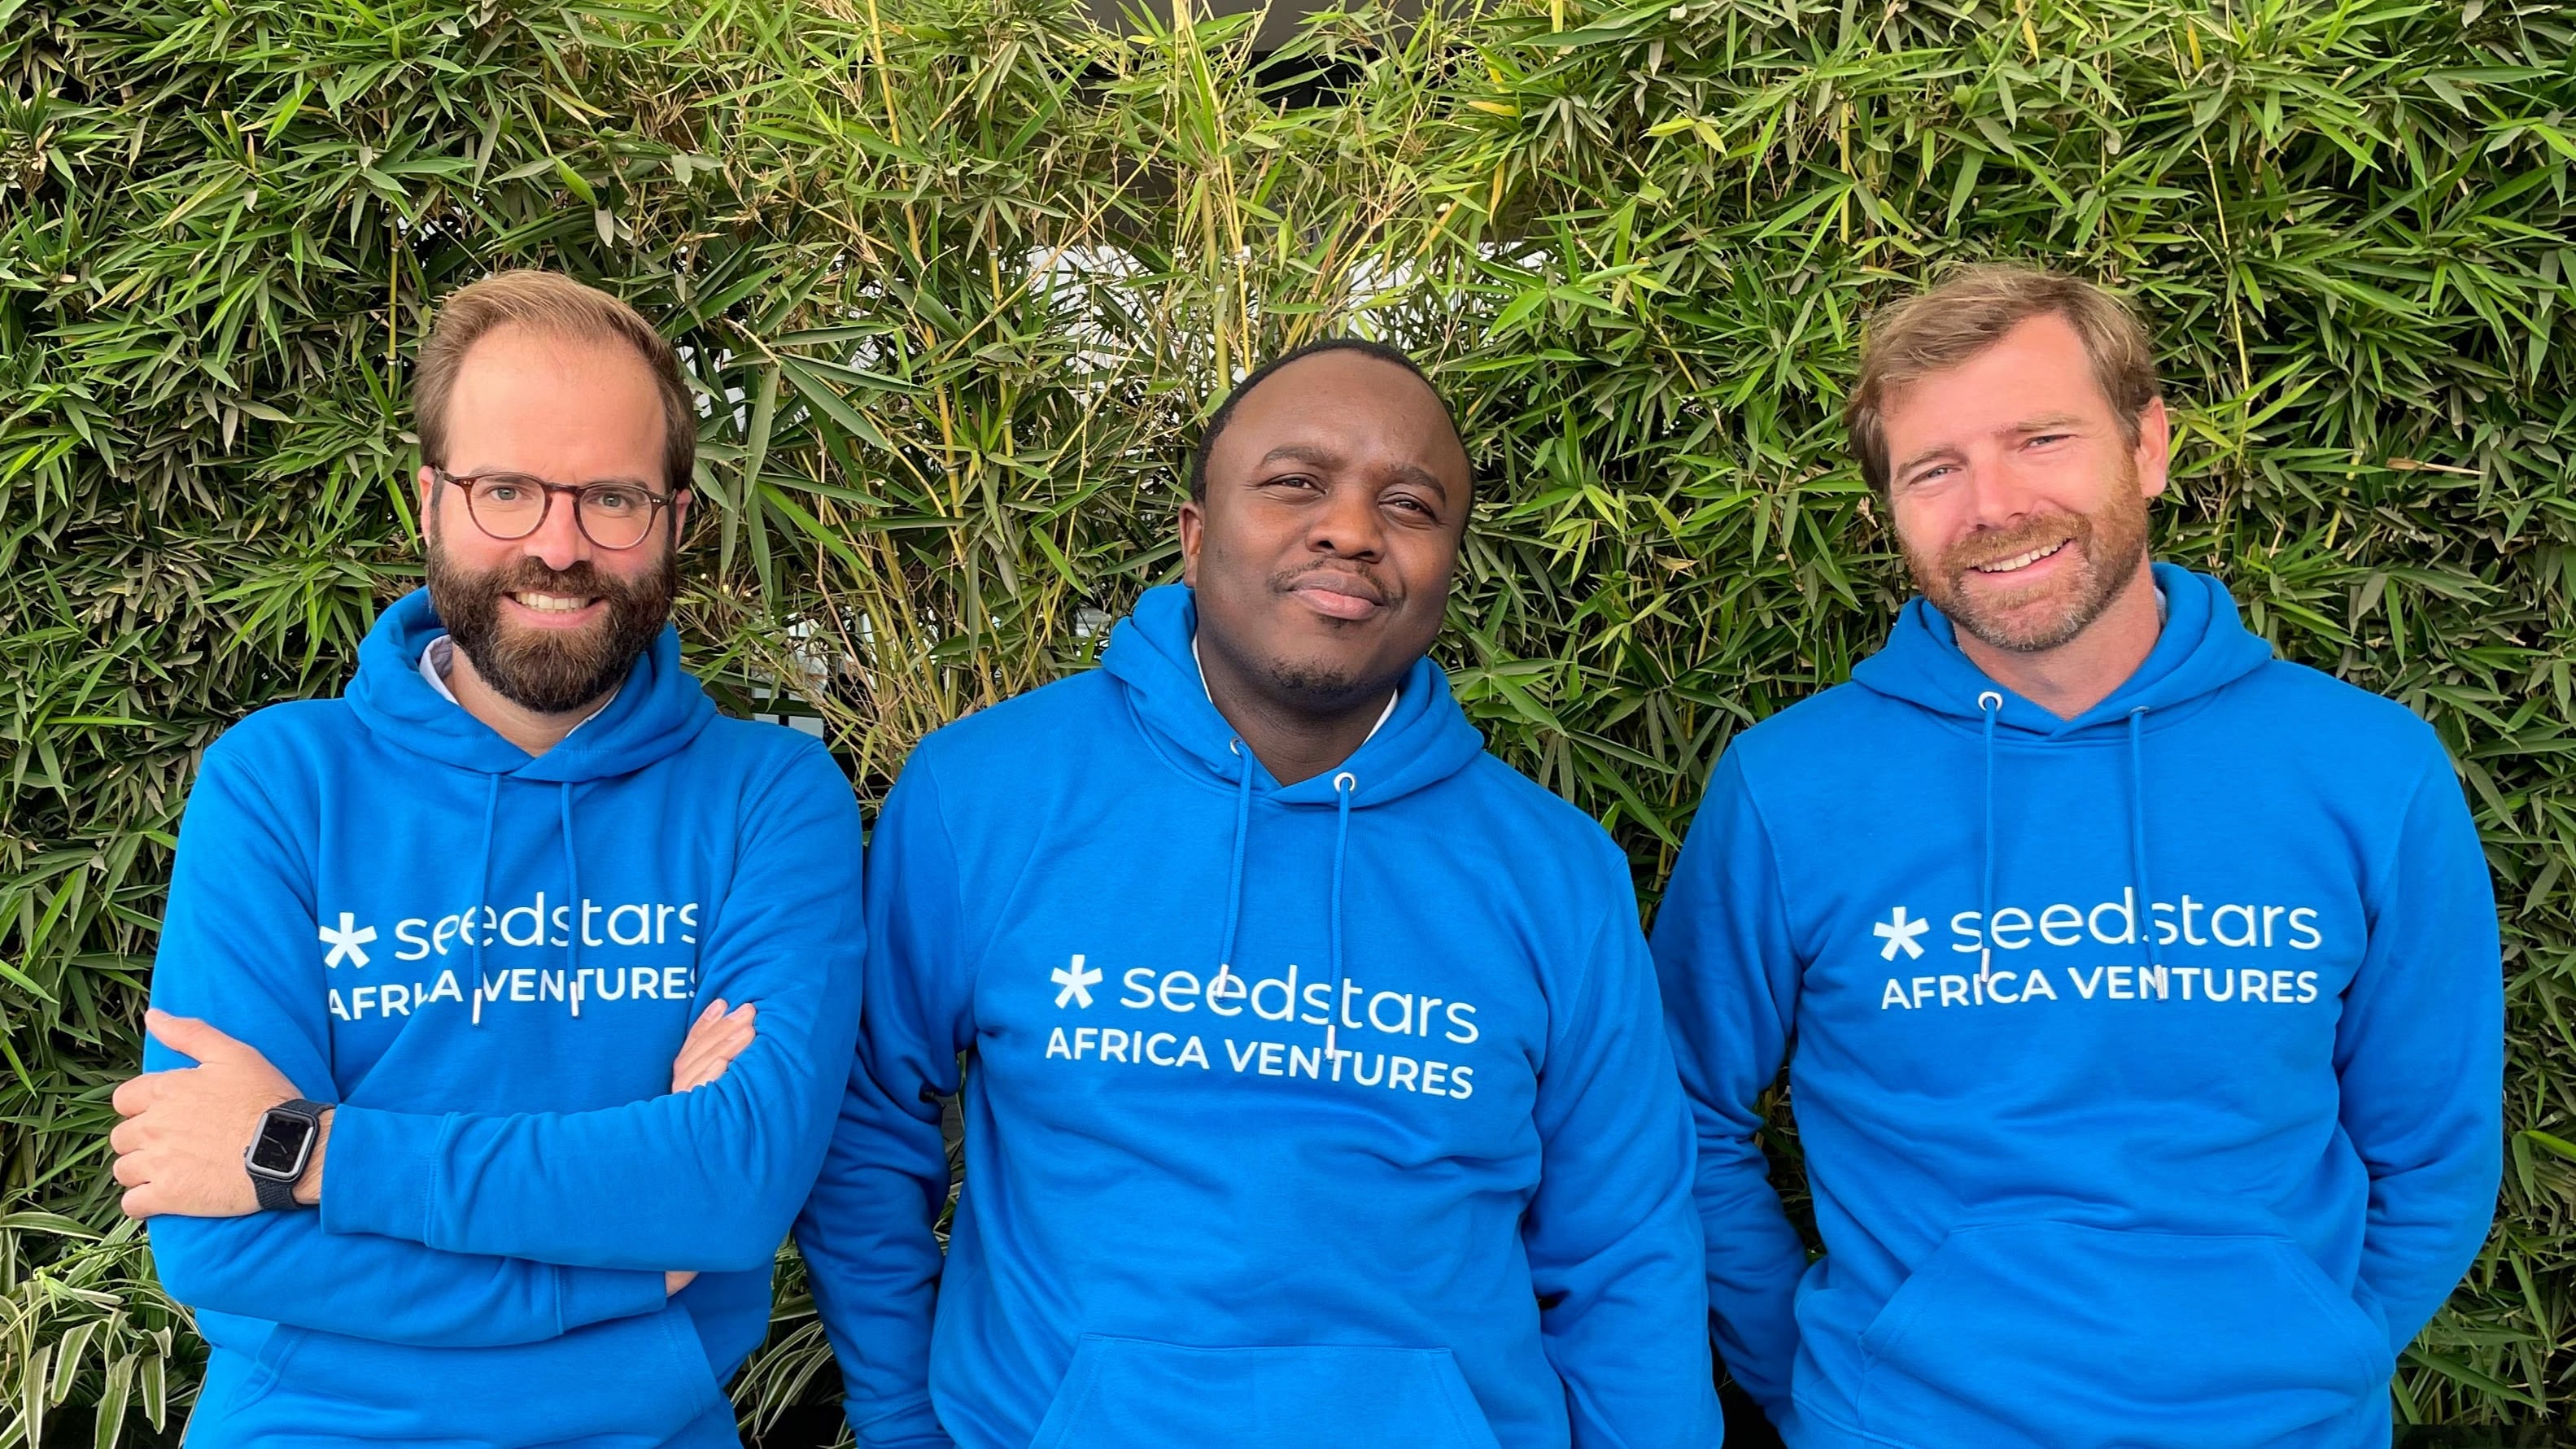 Seedstars Africa Ventures appoints new partner to back more founders in the continent